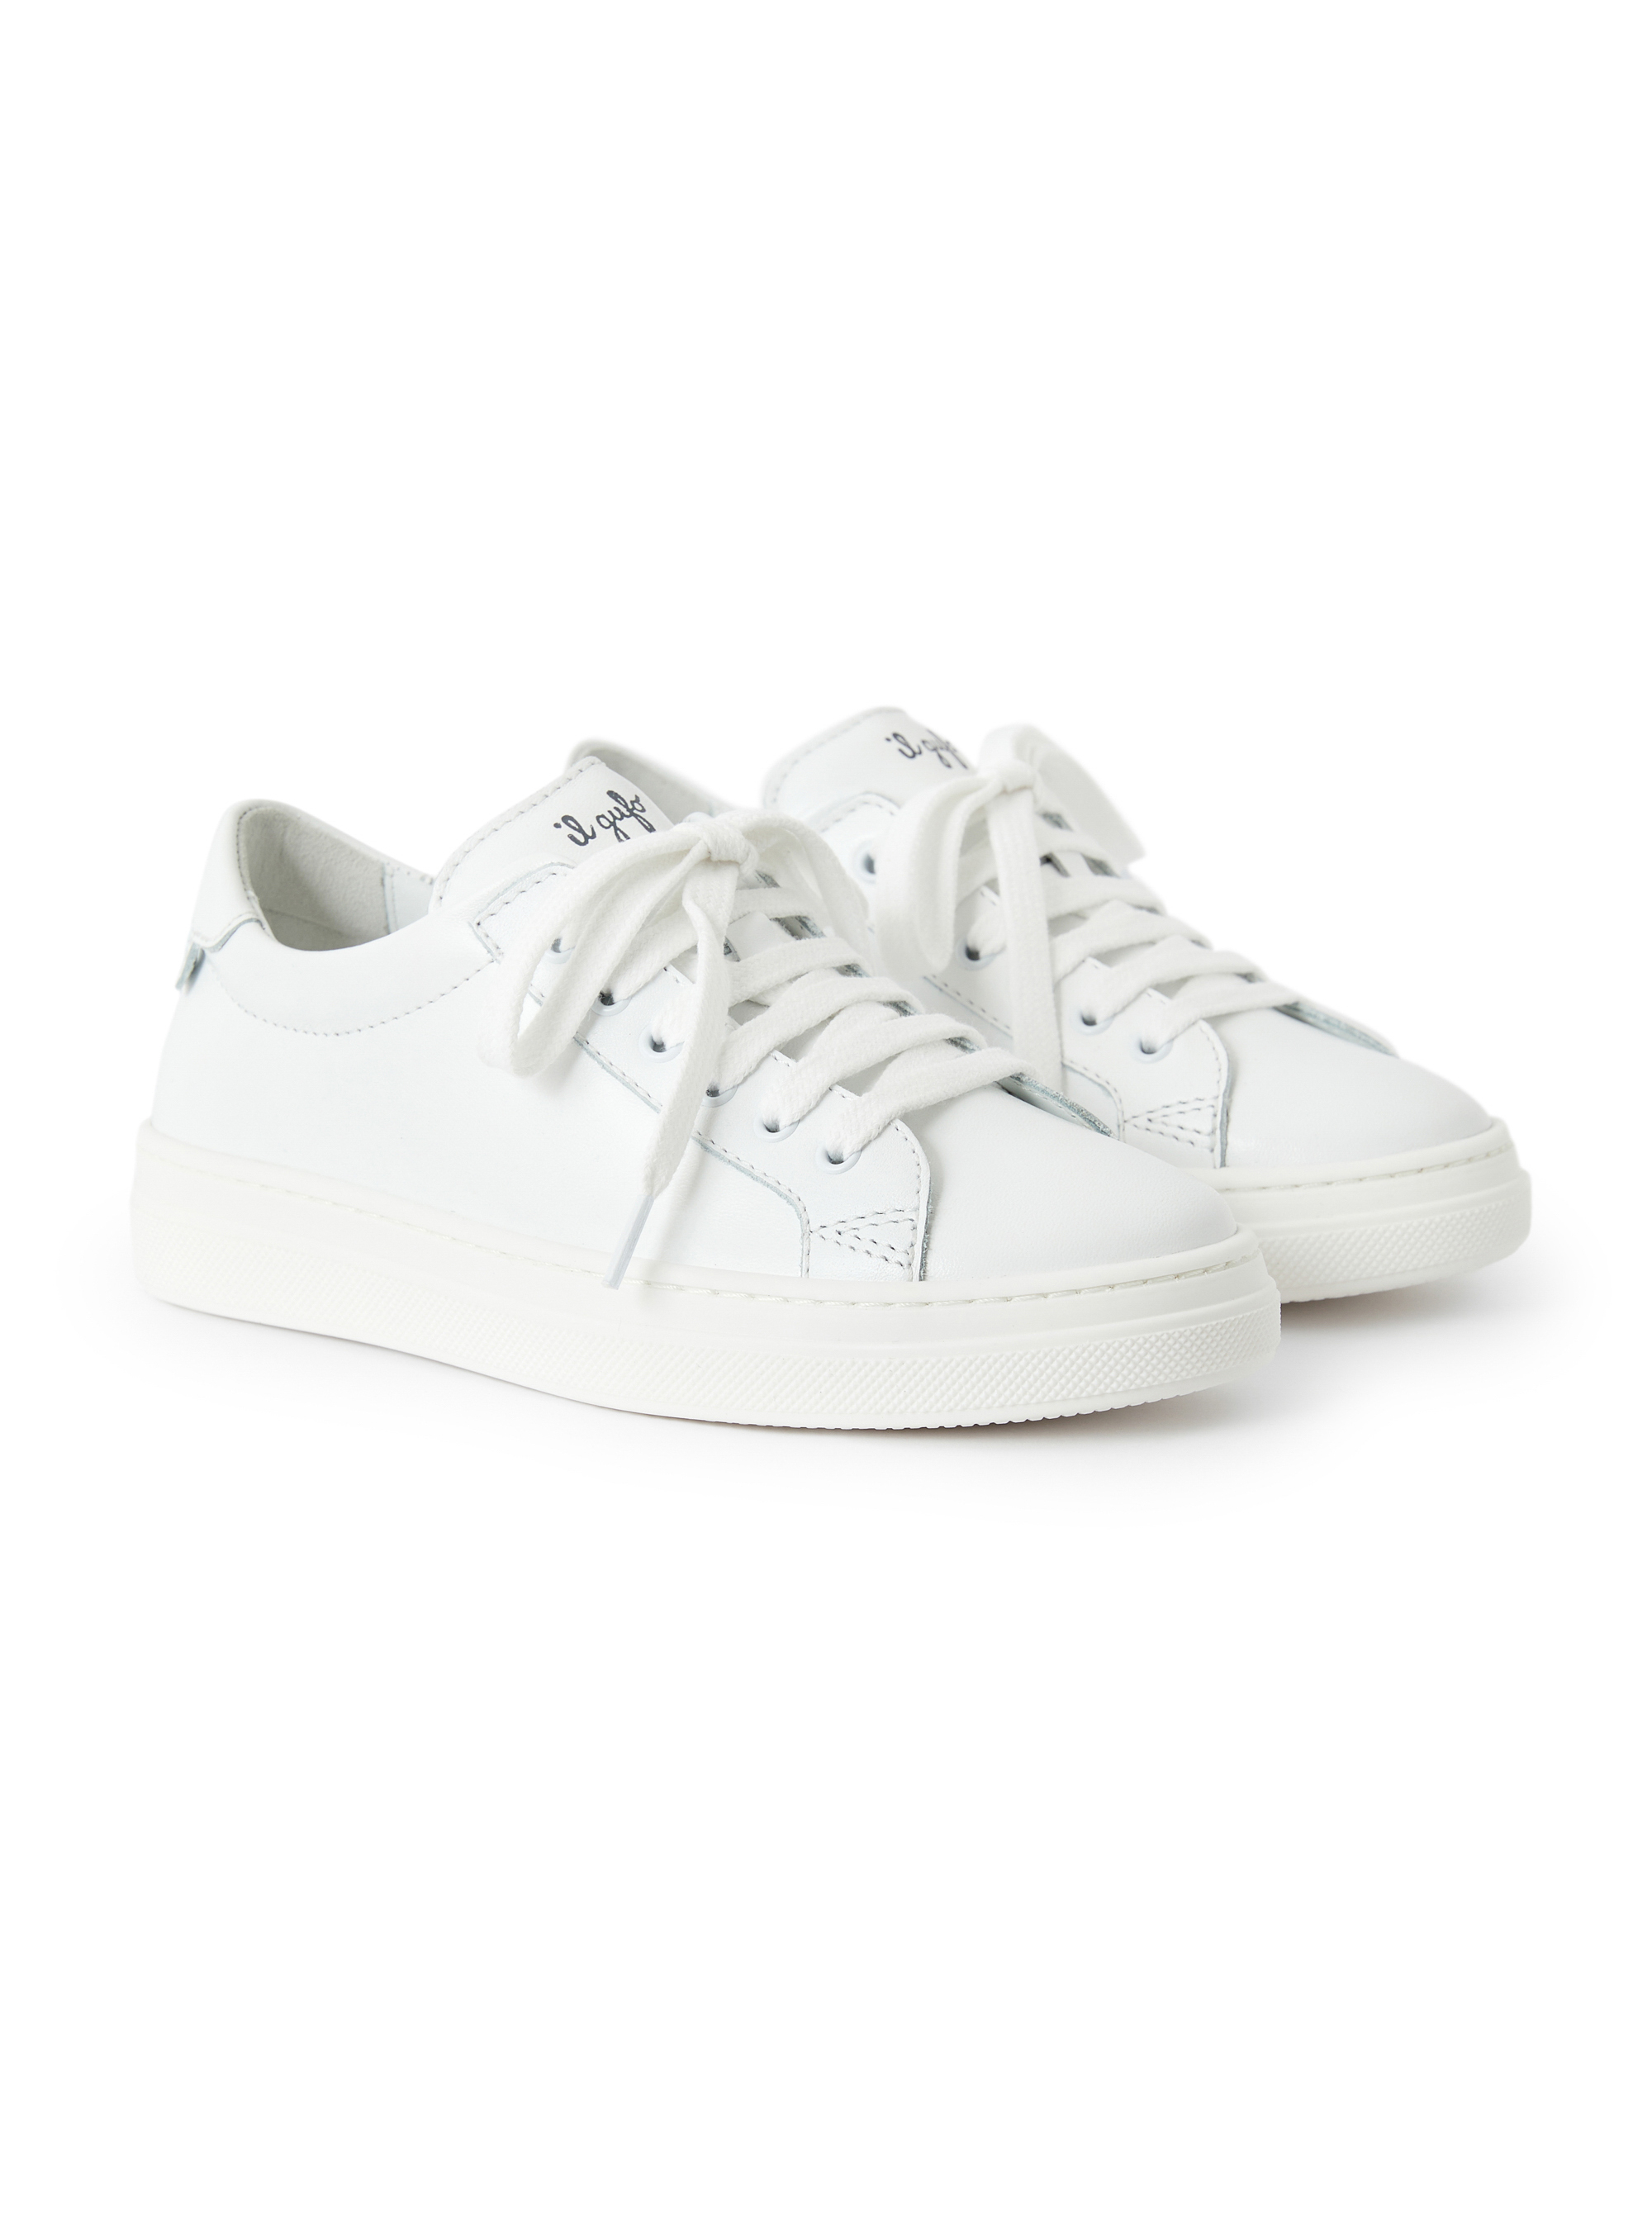 White leather sneakers - Shoes - Il Gufo